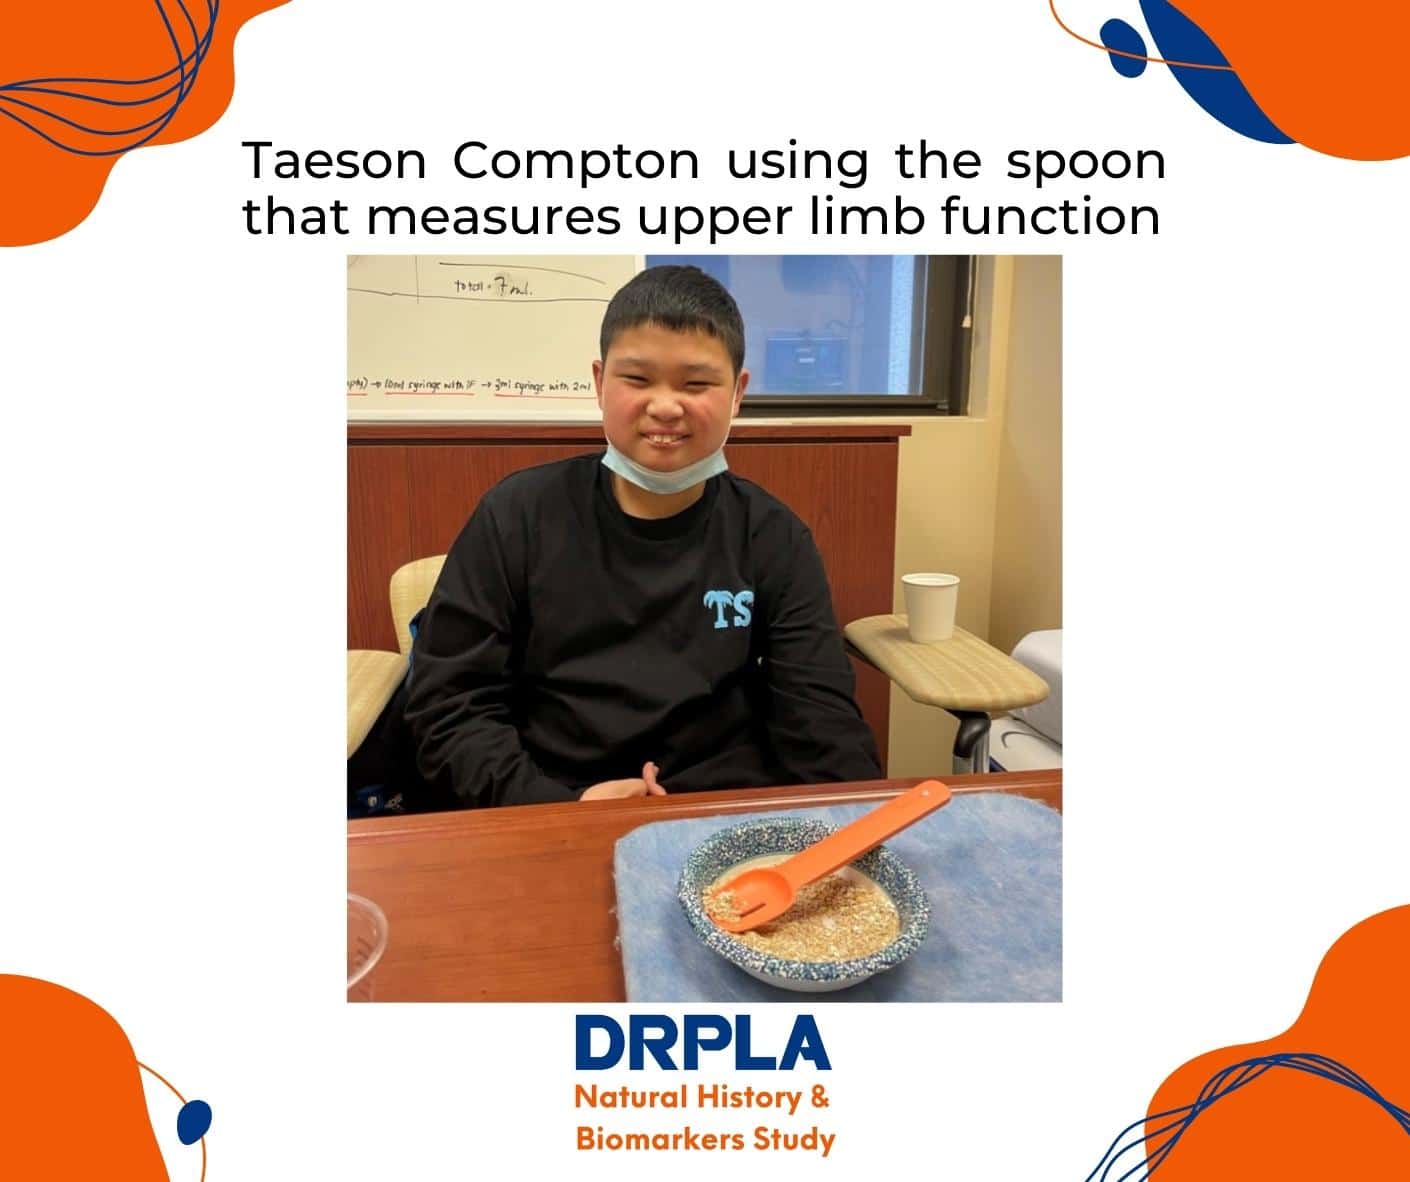 Taeson Compton using the spoon to measure upper limb function